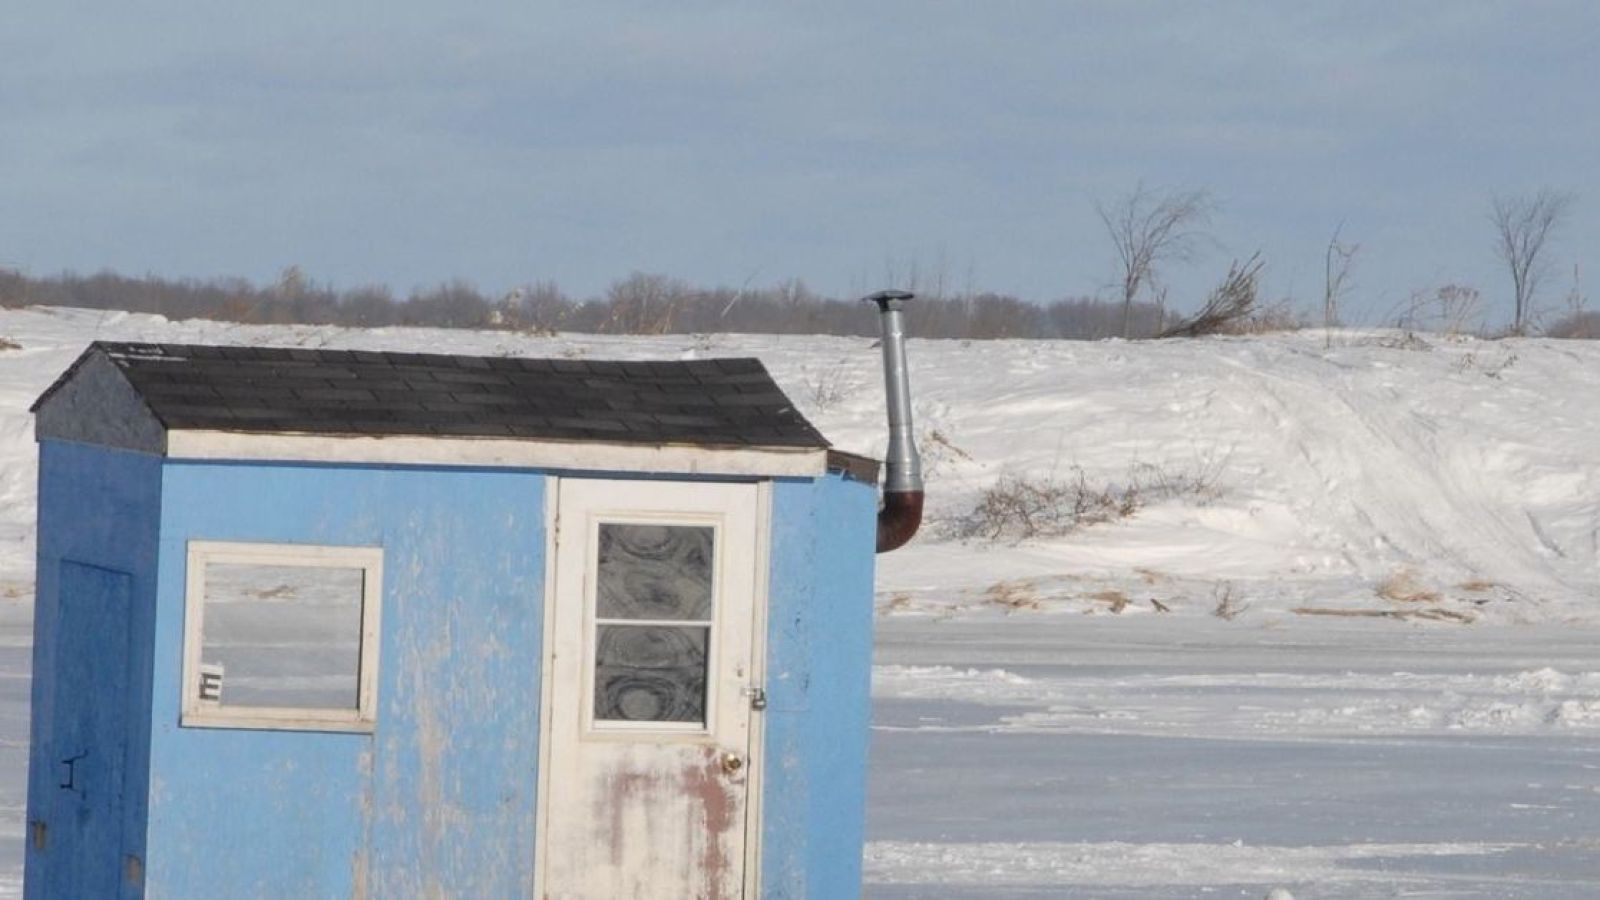 Canadian ice fishing huts, a portrait of improv styles